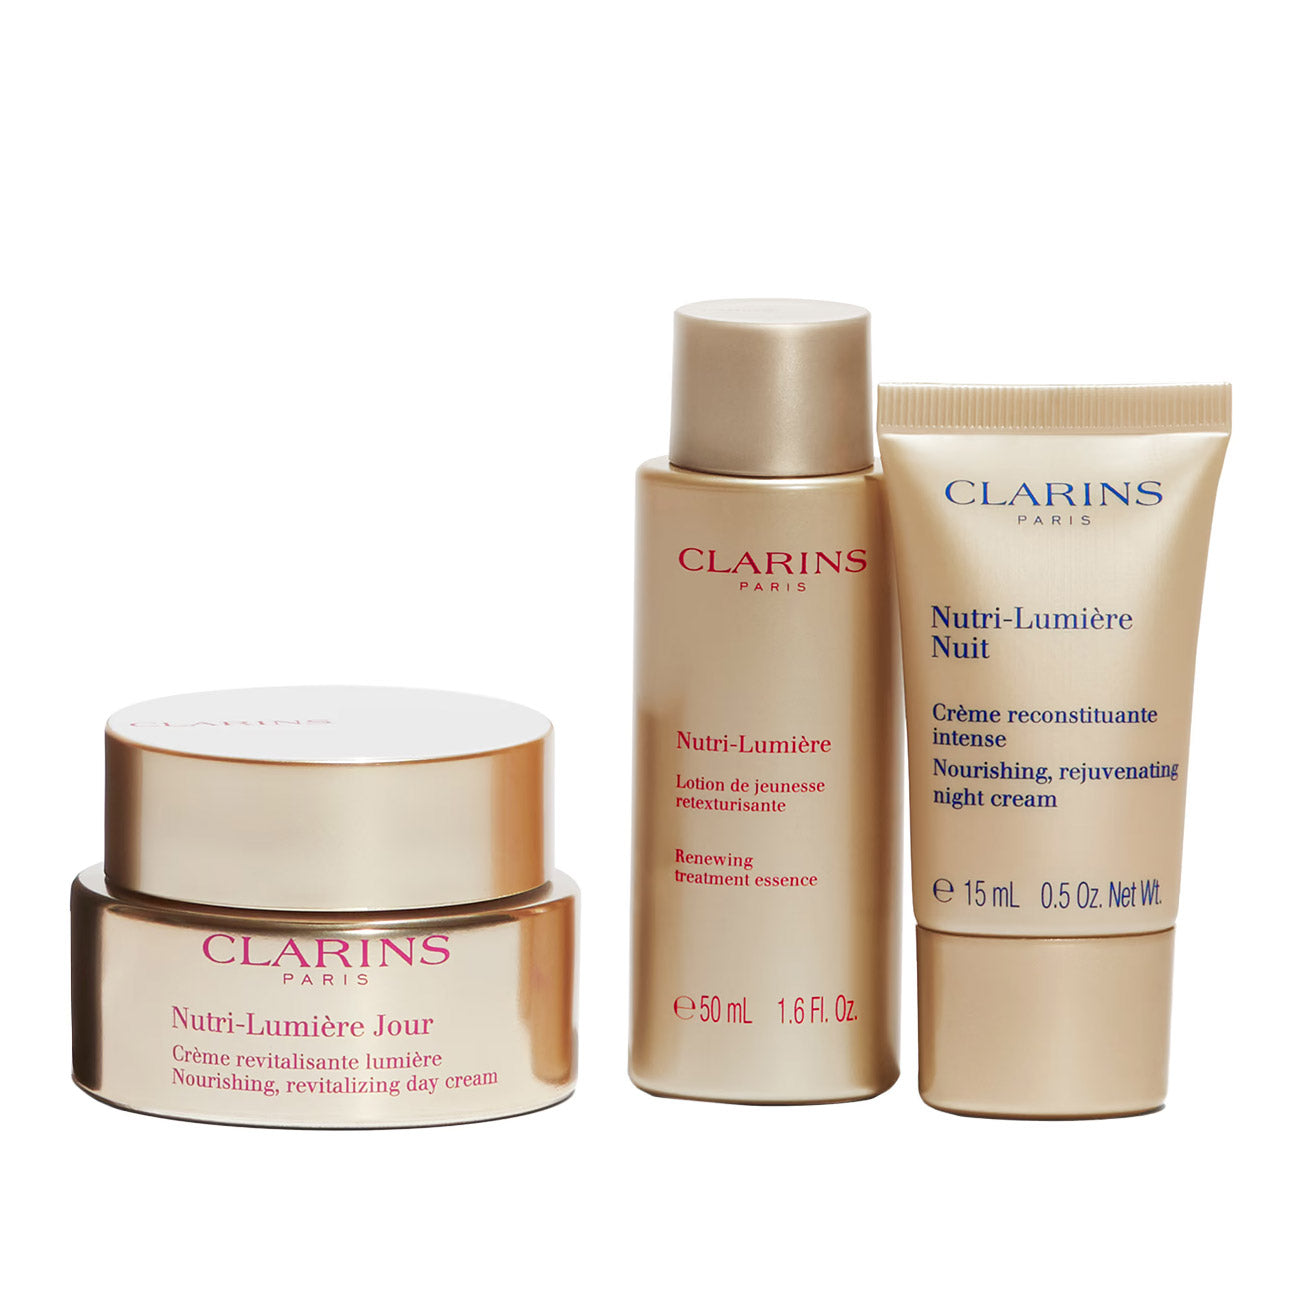 Clarins V Shaping Facial Lift Tightening & Anti-Puffiness Eye Concentrate, Skin Society